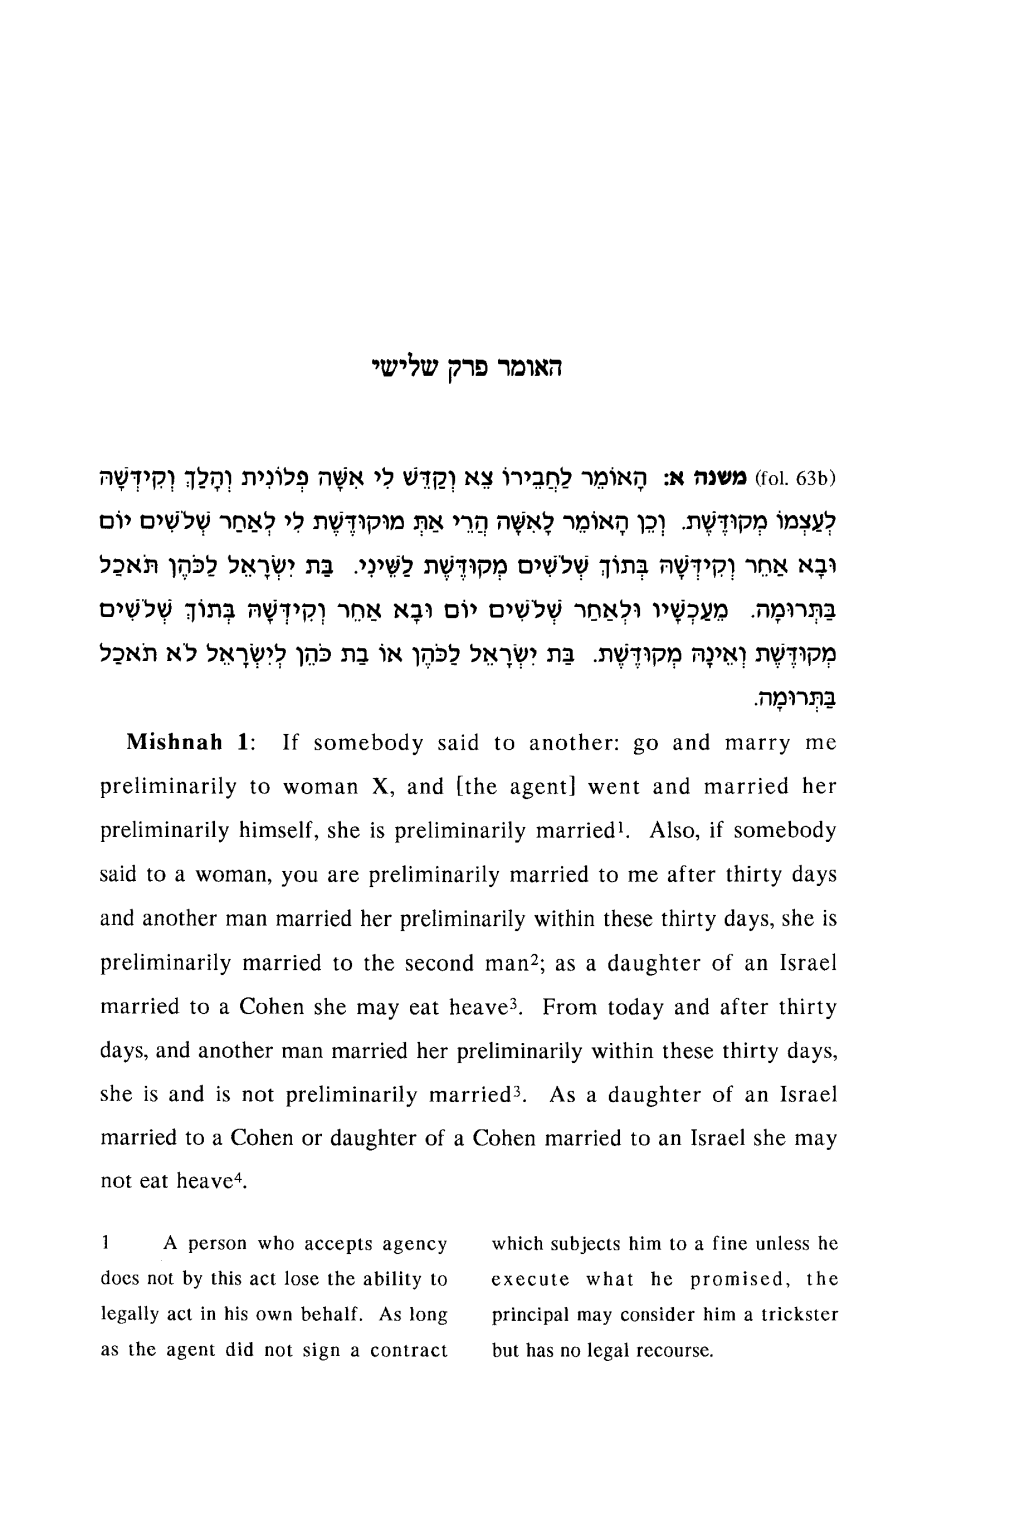 Mishnah 1: If Somebody Said to Another: Go and Marry Me